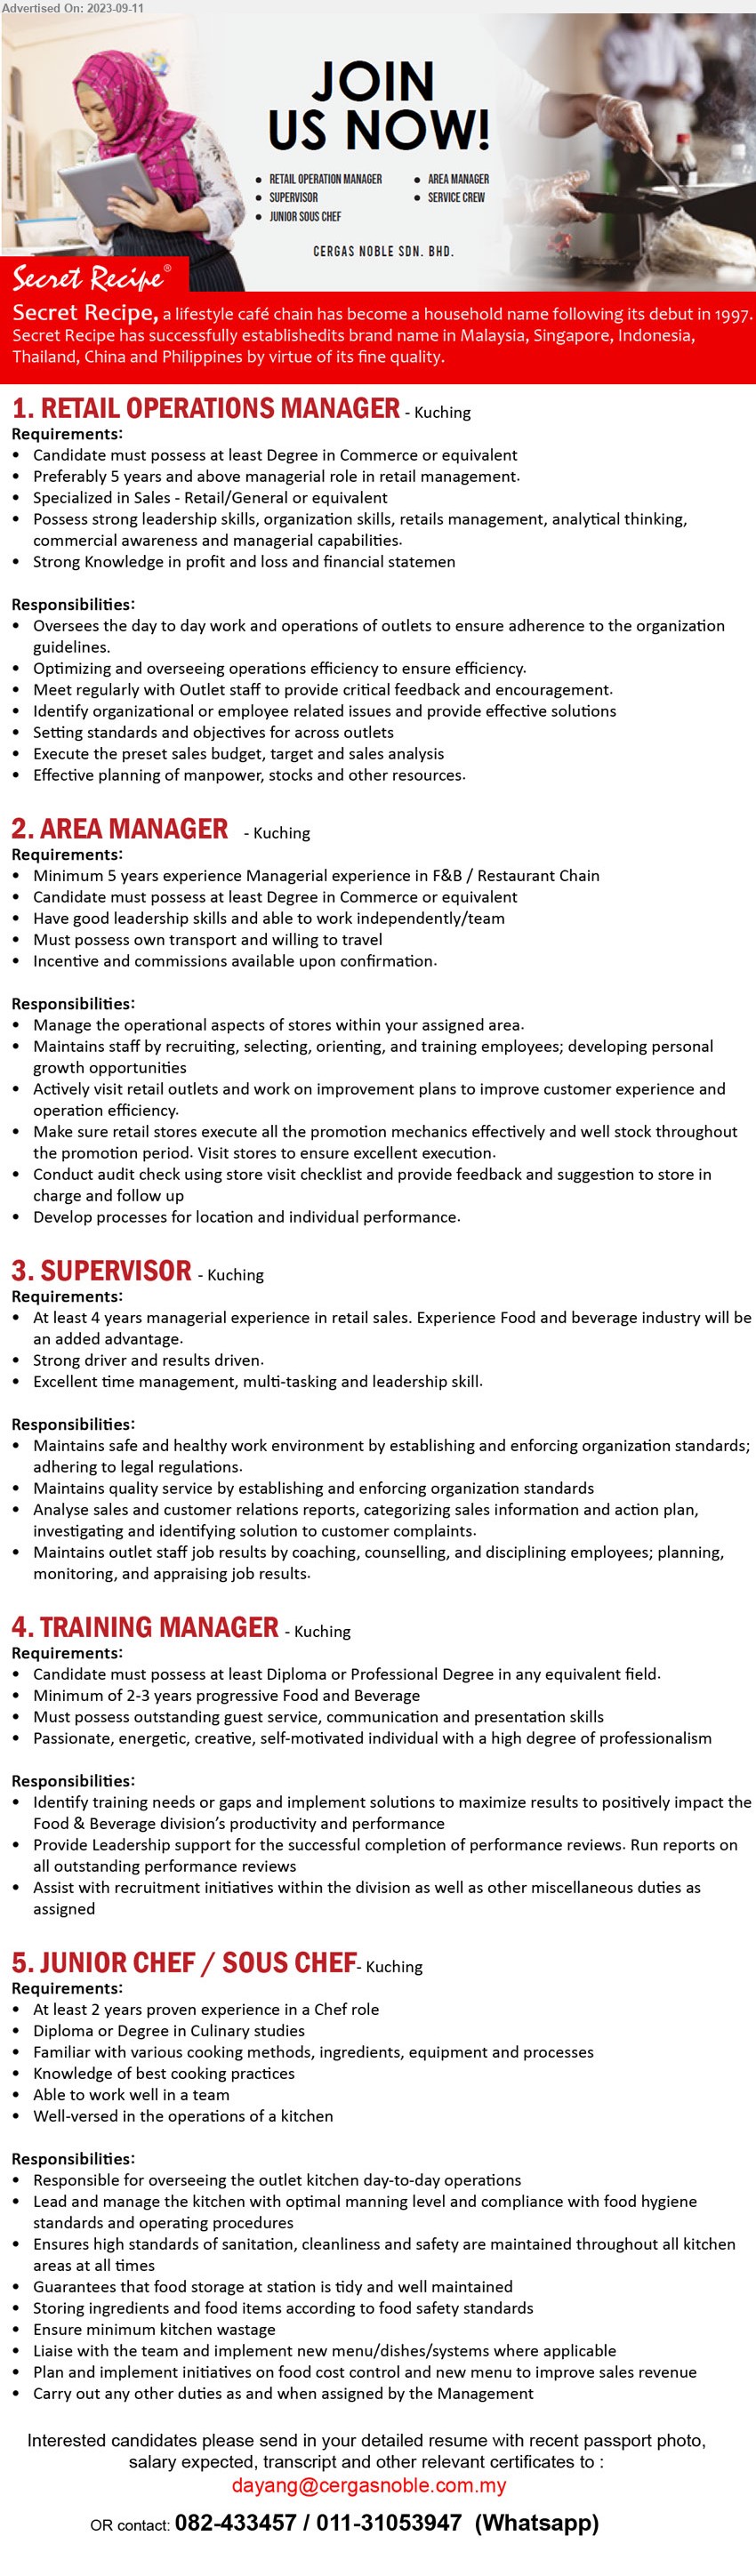 CERGAS NOBLE SDN BHD - 1. RETAIL OPERATIONS MANAGER (Kuching),  Degree in Commerce, 5 years and above managerial role in retail management,...
2. AREA MANAGER  (Kuching),  5 years experience Managerial experience in F&B / Restaurant Chain, Degree in Commerce,...
3. SUPERVISOR (Kuching), 4 years managerial experience in retail sales. Experience Food and beverage industry ,...
4. TRAINING MANAGER (Kuching), Diploma or Professional Degree, 2-3 yrs. exp. Food and Beverage,...
5. JUNIOR CHEF / SOUS CHEF (Kuching), Diploma or Degree in Culinary studies, 2 yrs. exp.,...
Contact: 082-433457 / 011-31053947  (Whatsapp) /Email resume to ...